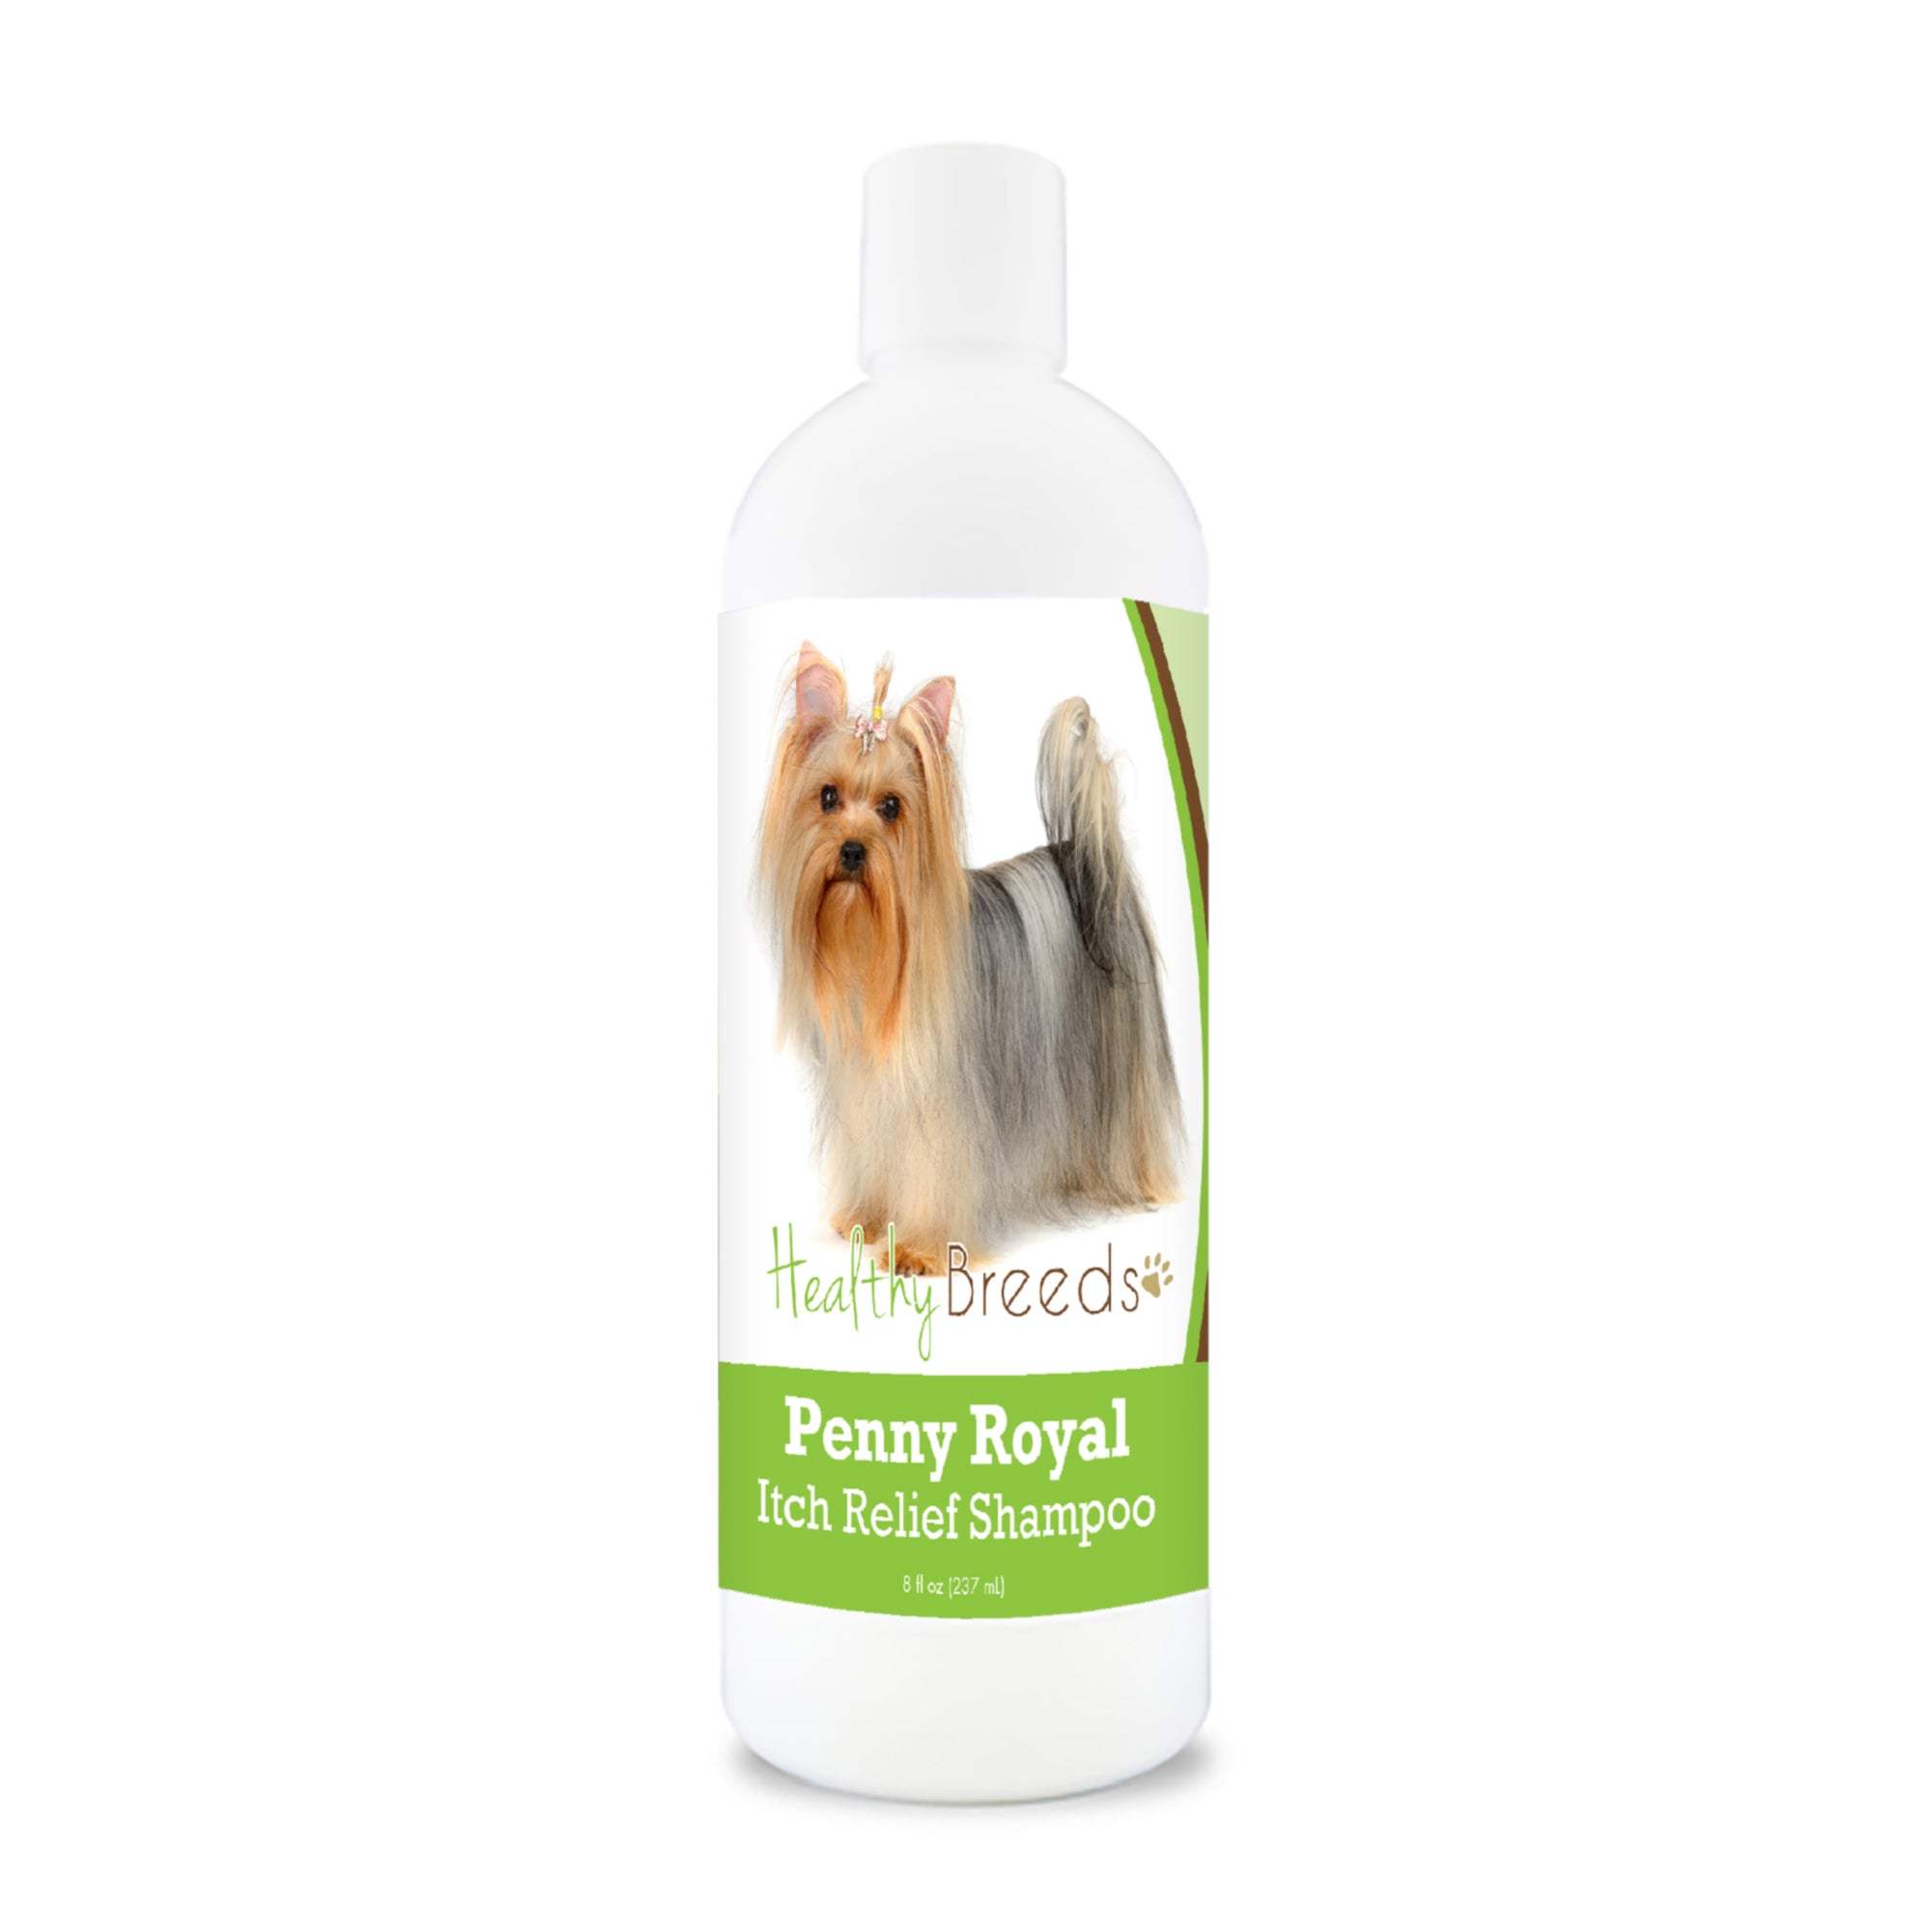 Yorkshire Terrier Penny Royal Itch Relief Shampoo 8 oz